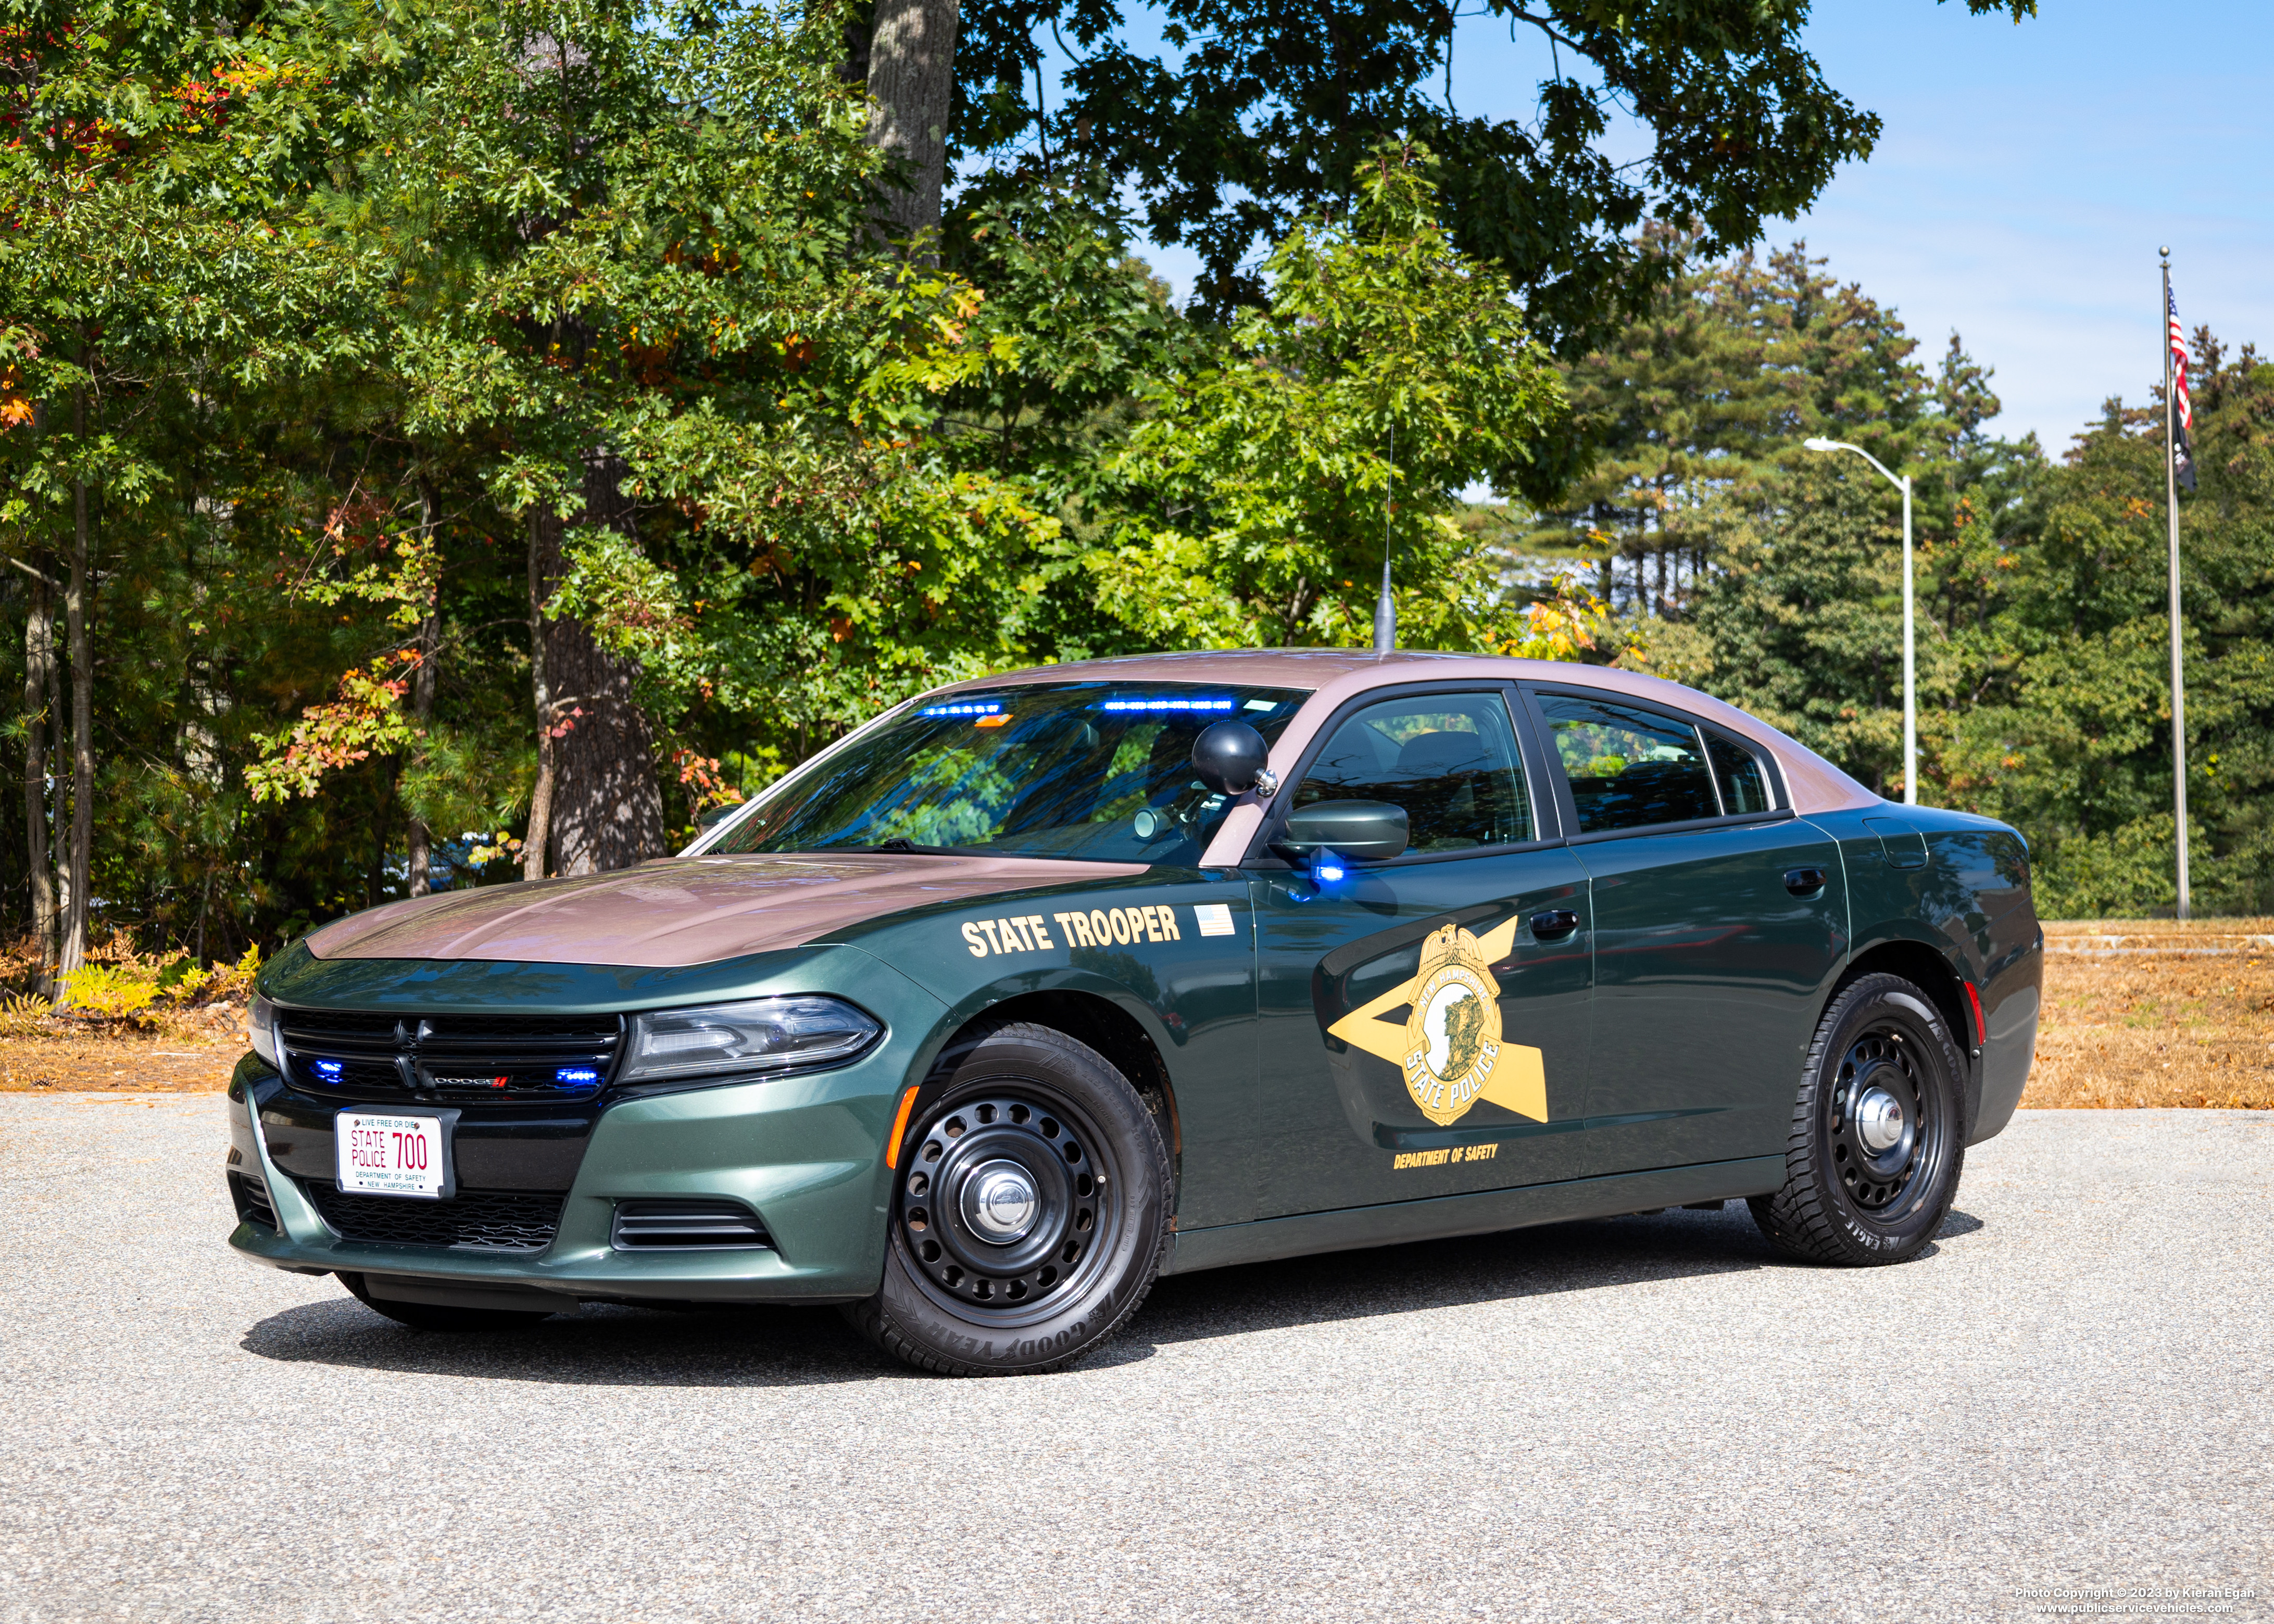 A photo  of New Hampshire State Police
            Cruiser 700, a 2014 Dodge Charger             taken by Kieran Egan